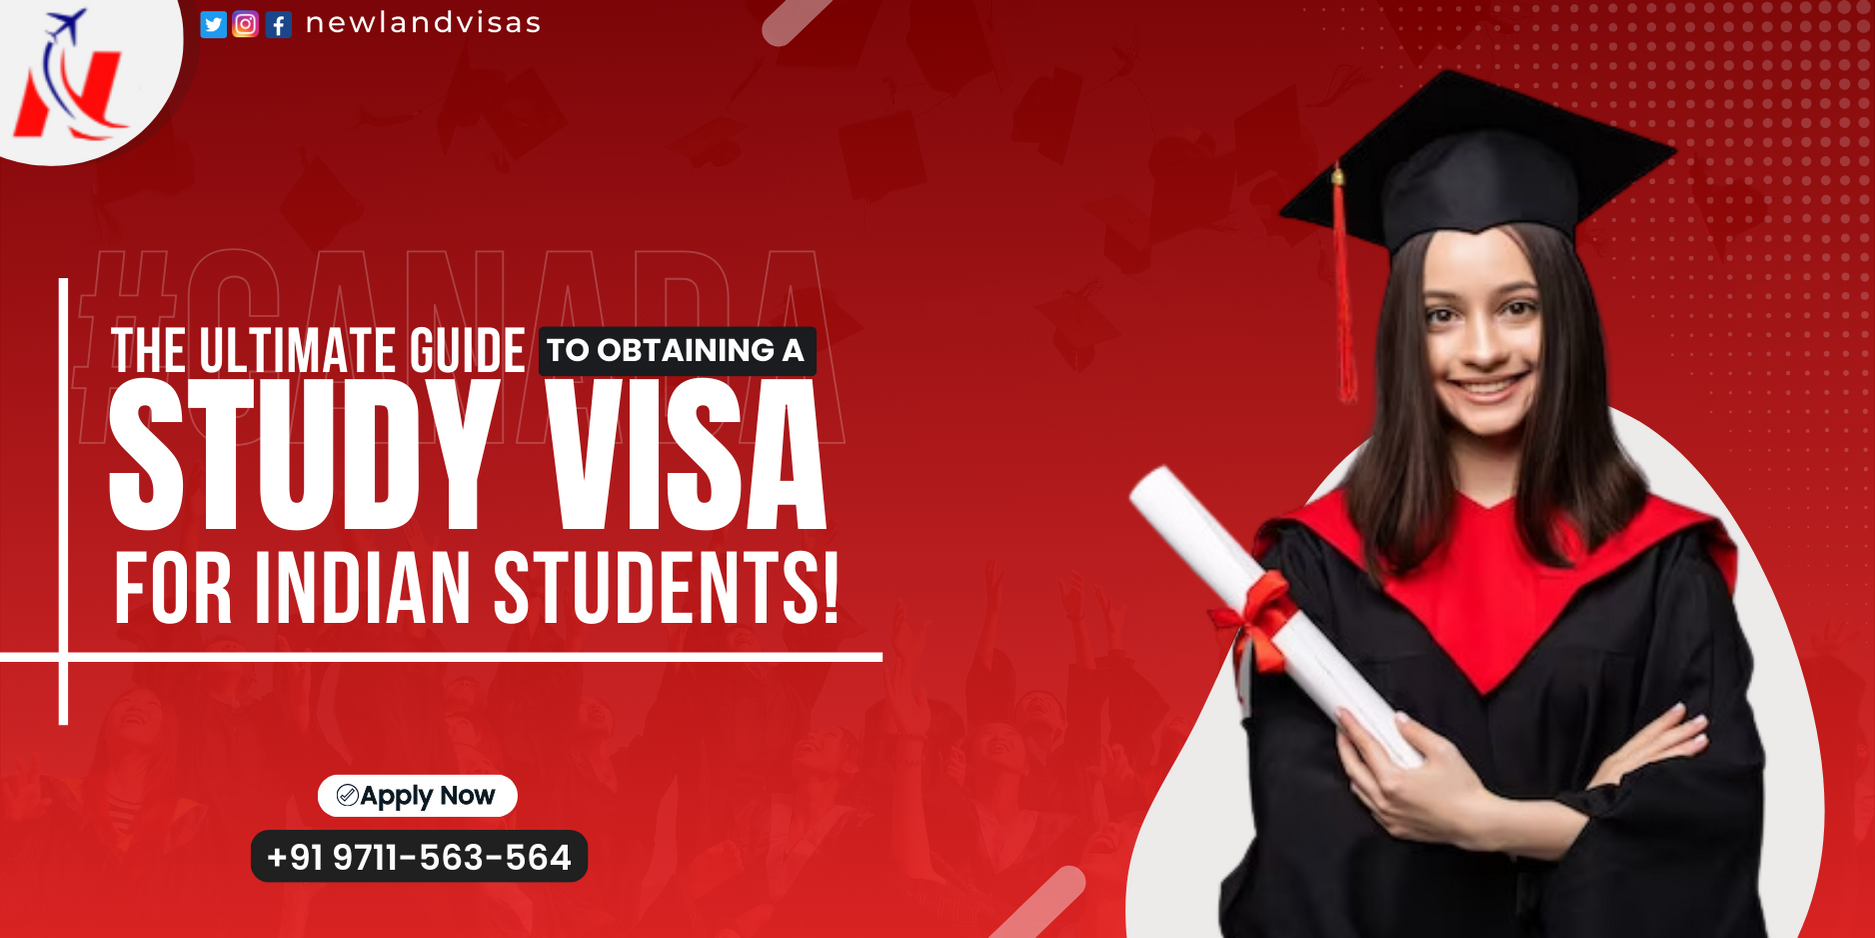 The Ultimate Guide to Obtaining a Study Visa for Indian Students!